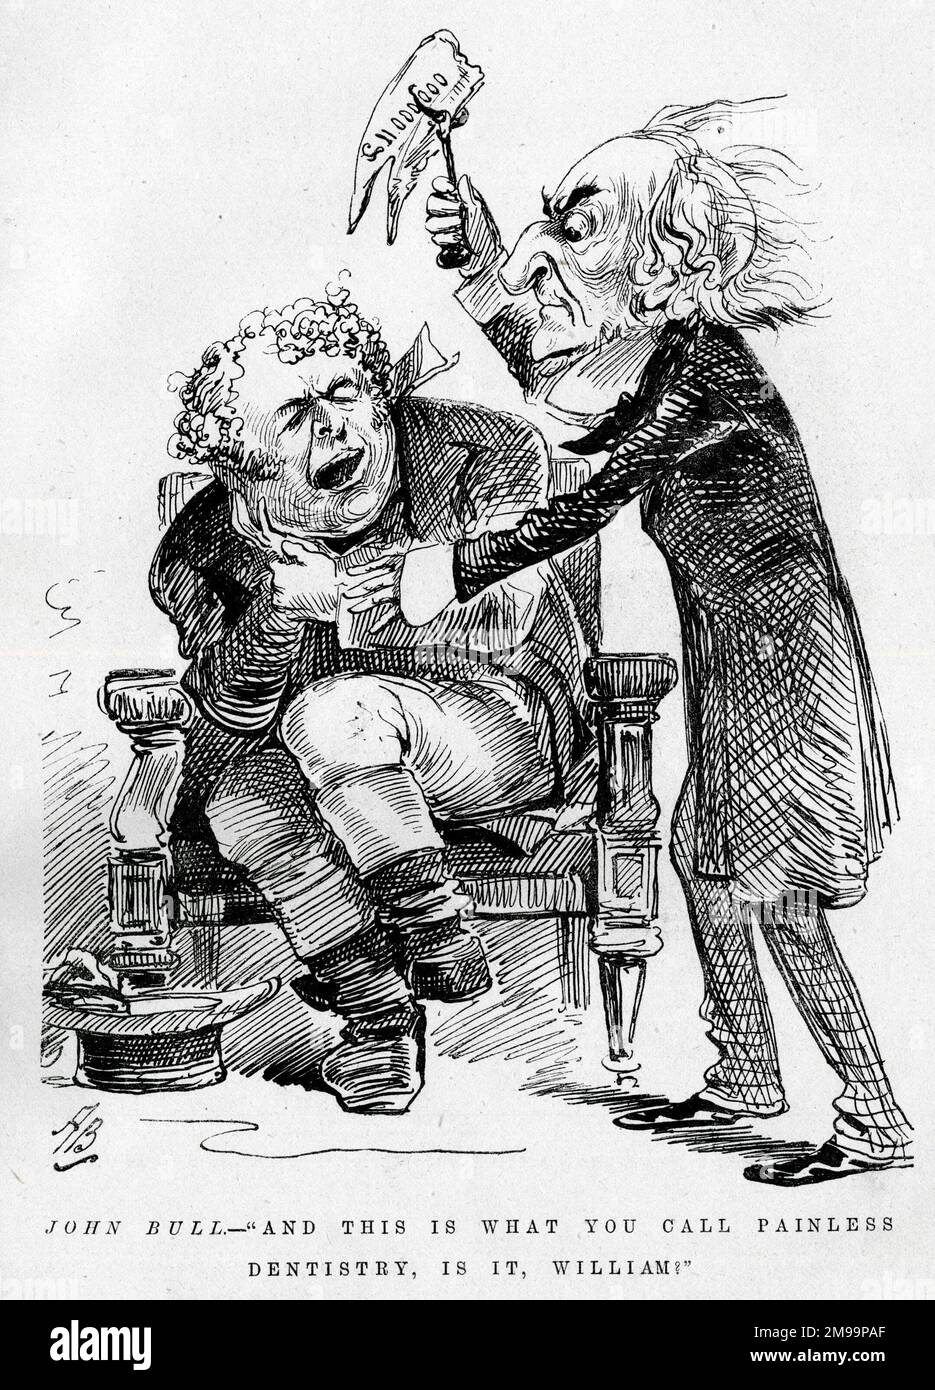 Cartoon, John Bull with William Gladstone as a dentist who has just extracted an eleven million pound tooth - And this is what you call painless dentistry, is it, William? Stock Photo